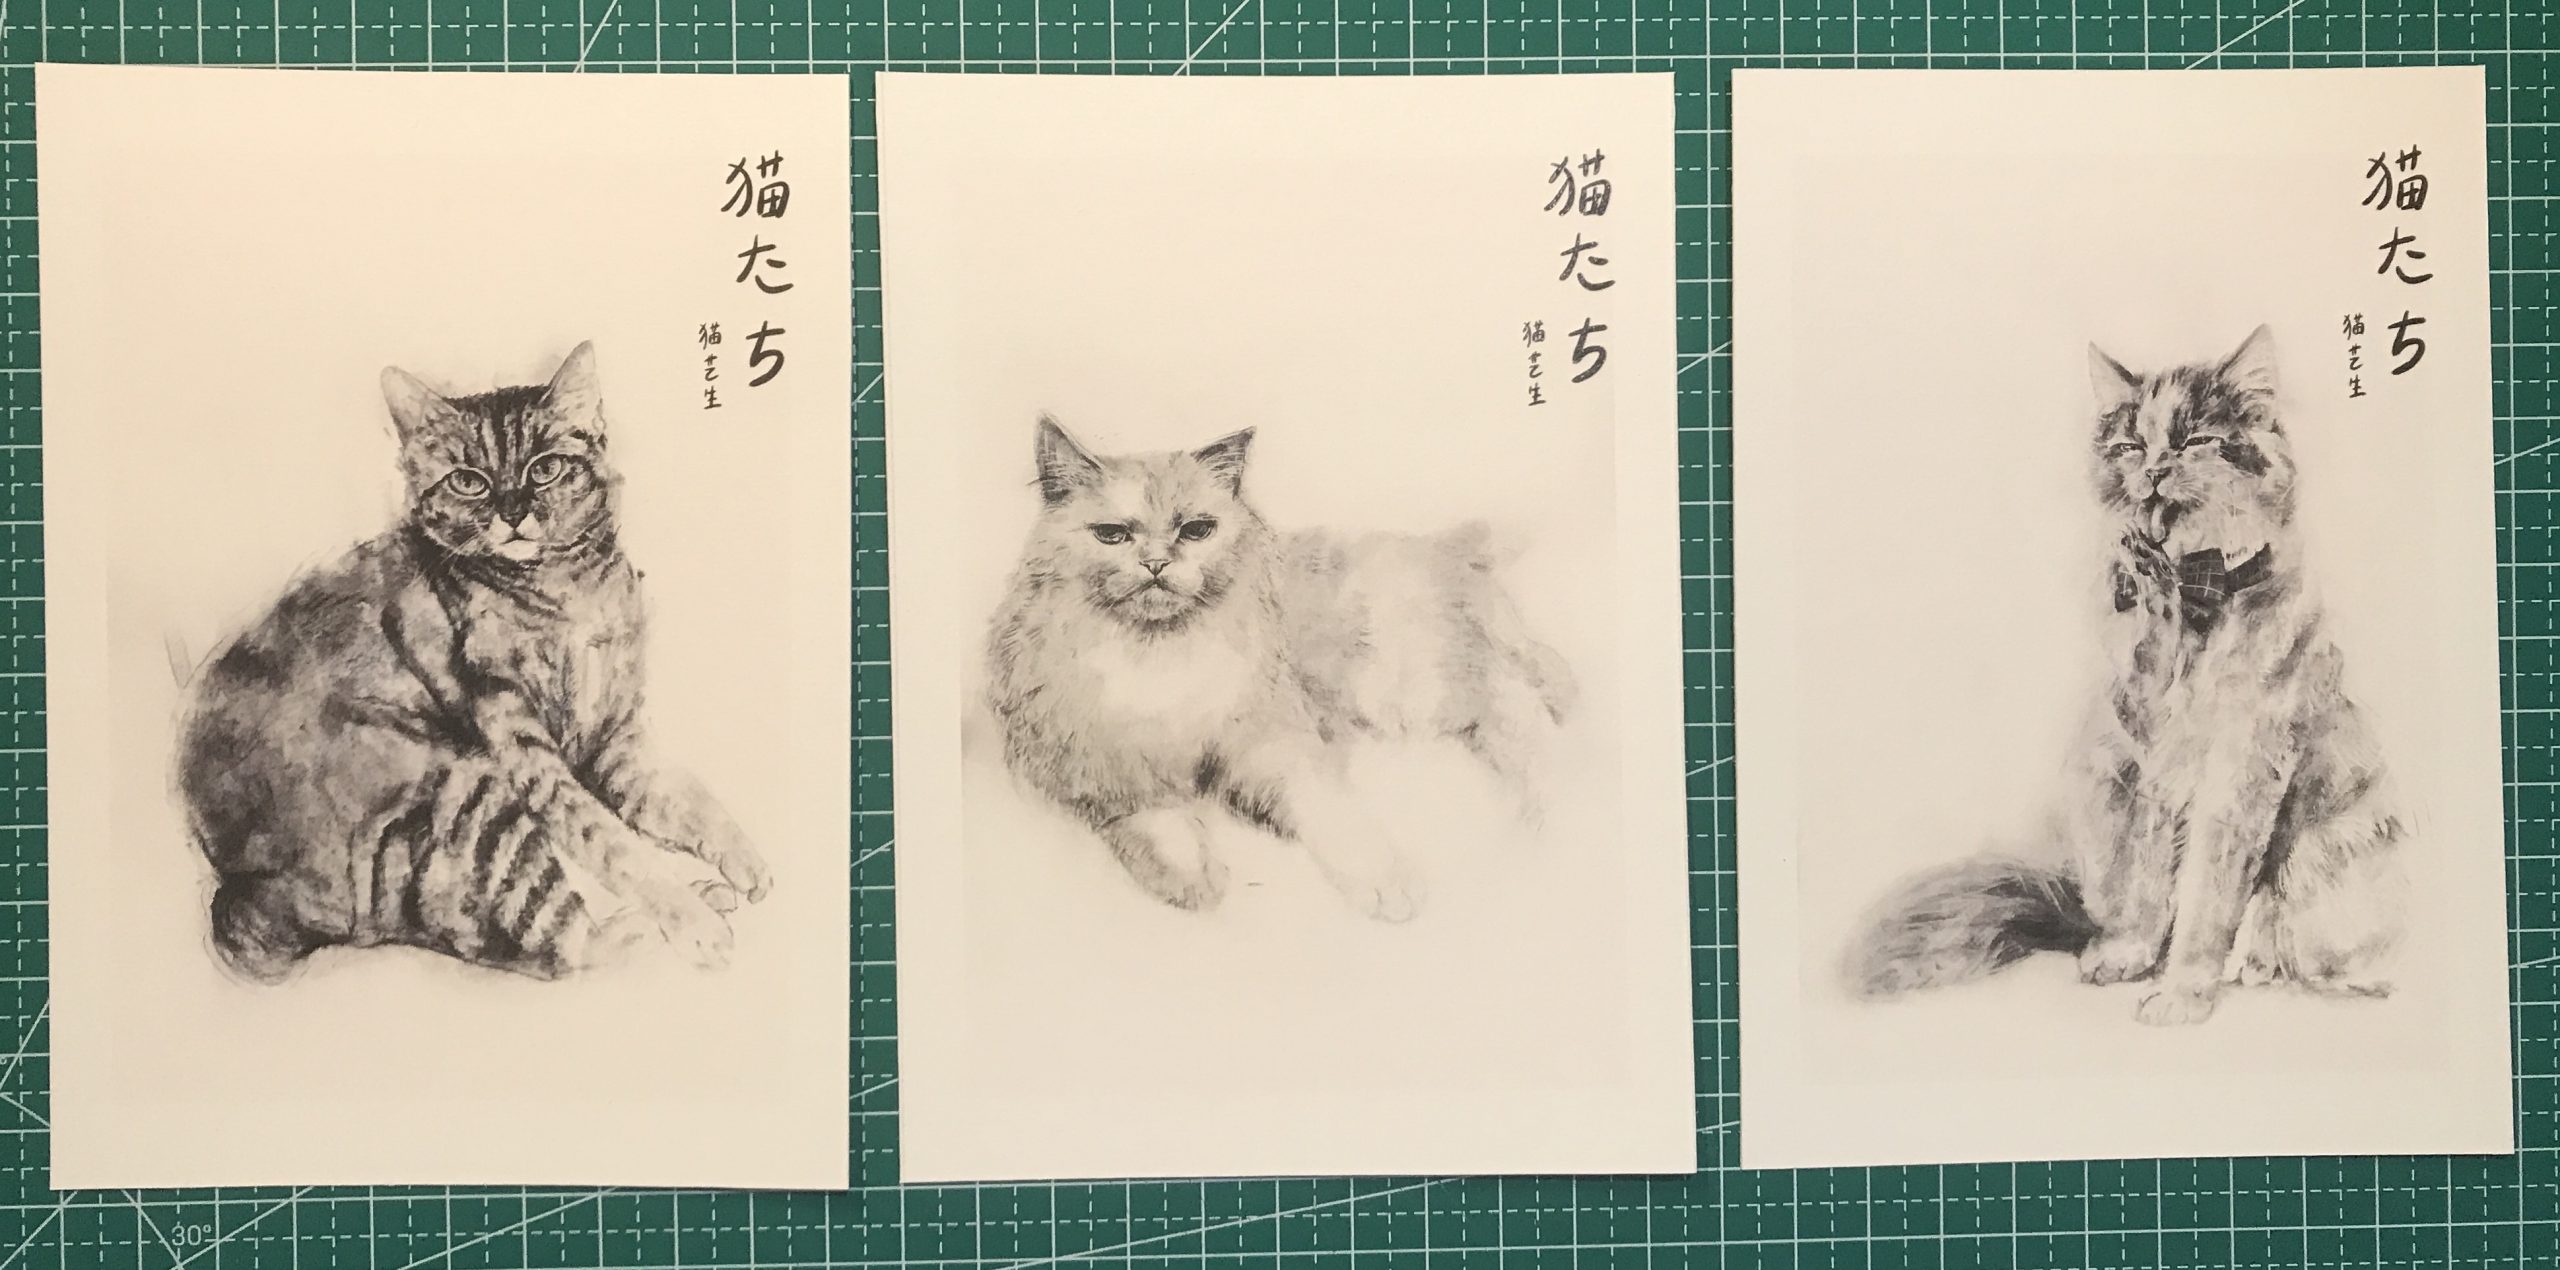 Printed portraits of artist's cats in charcoal and the studio's logo - nekotachi.